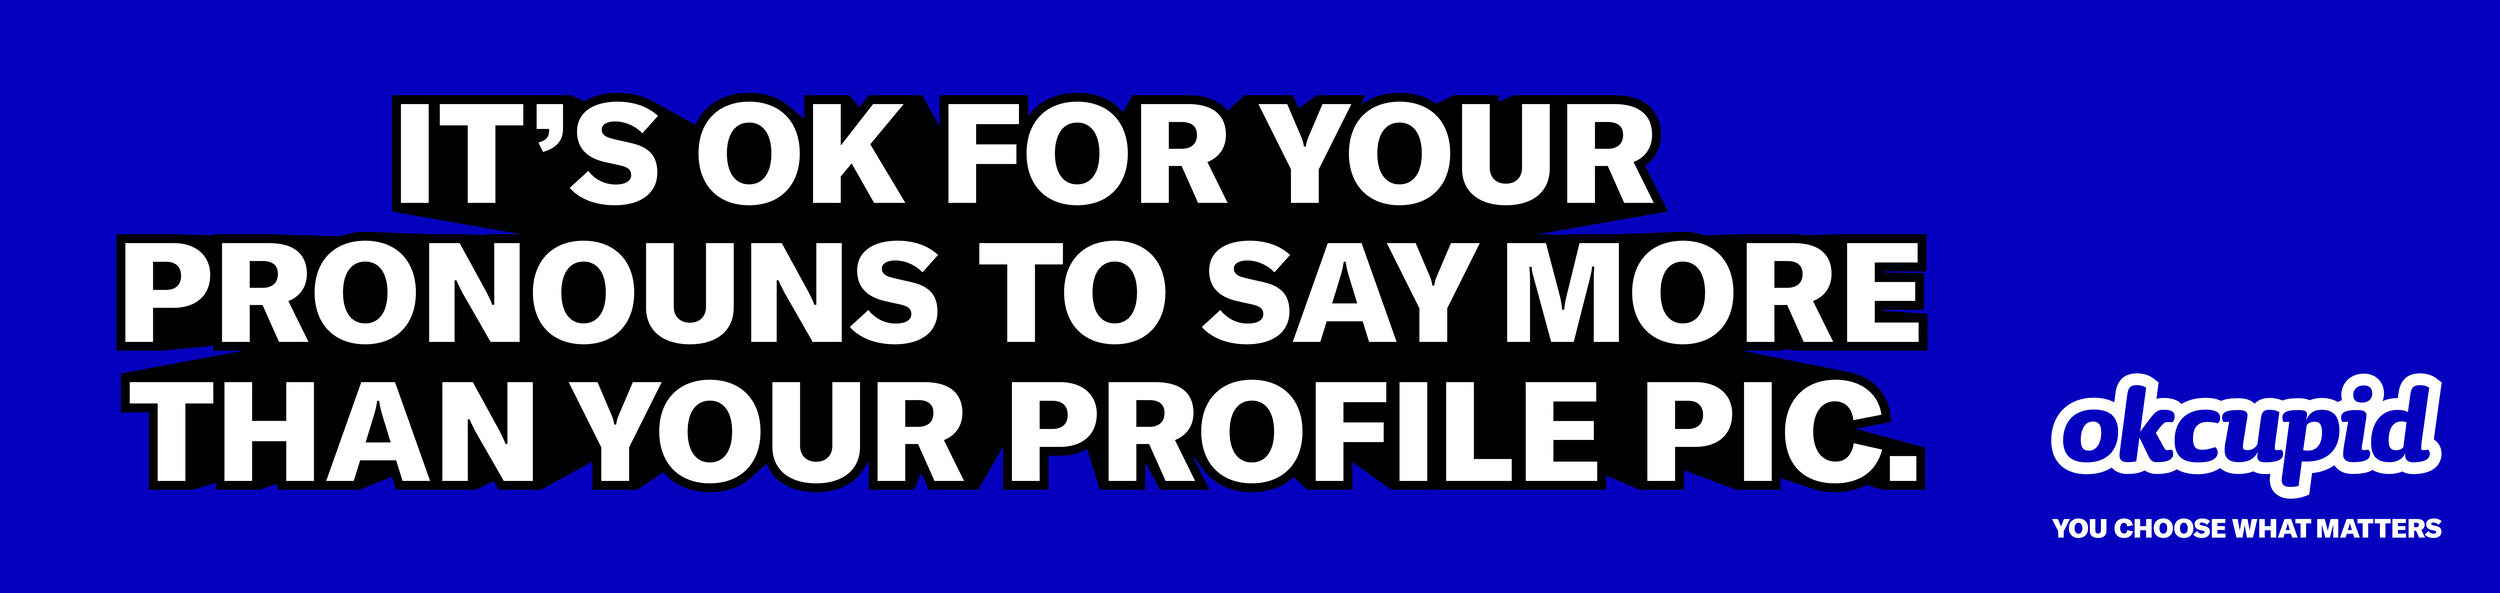 it's ok for your pronouns to say more than your profile pic